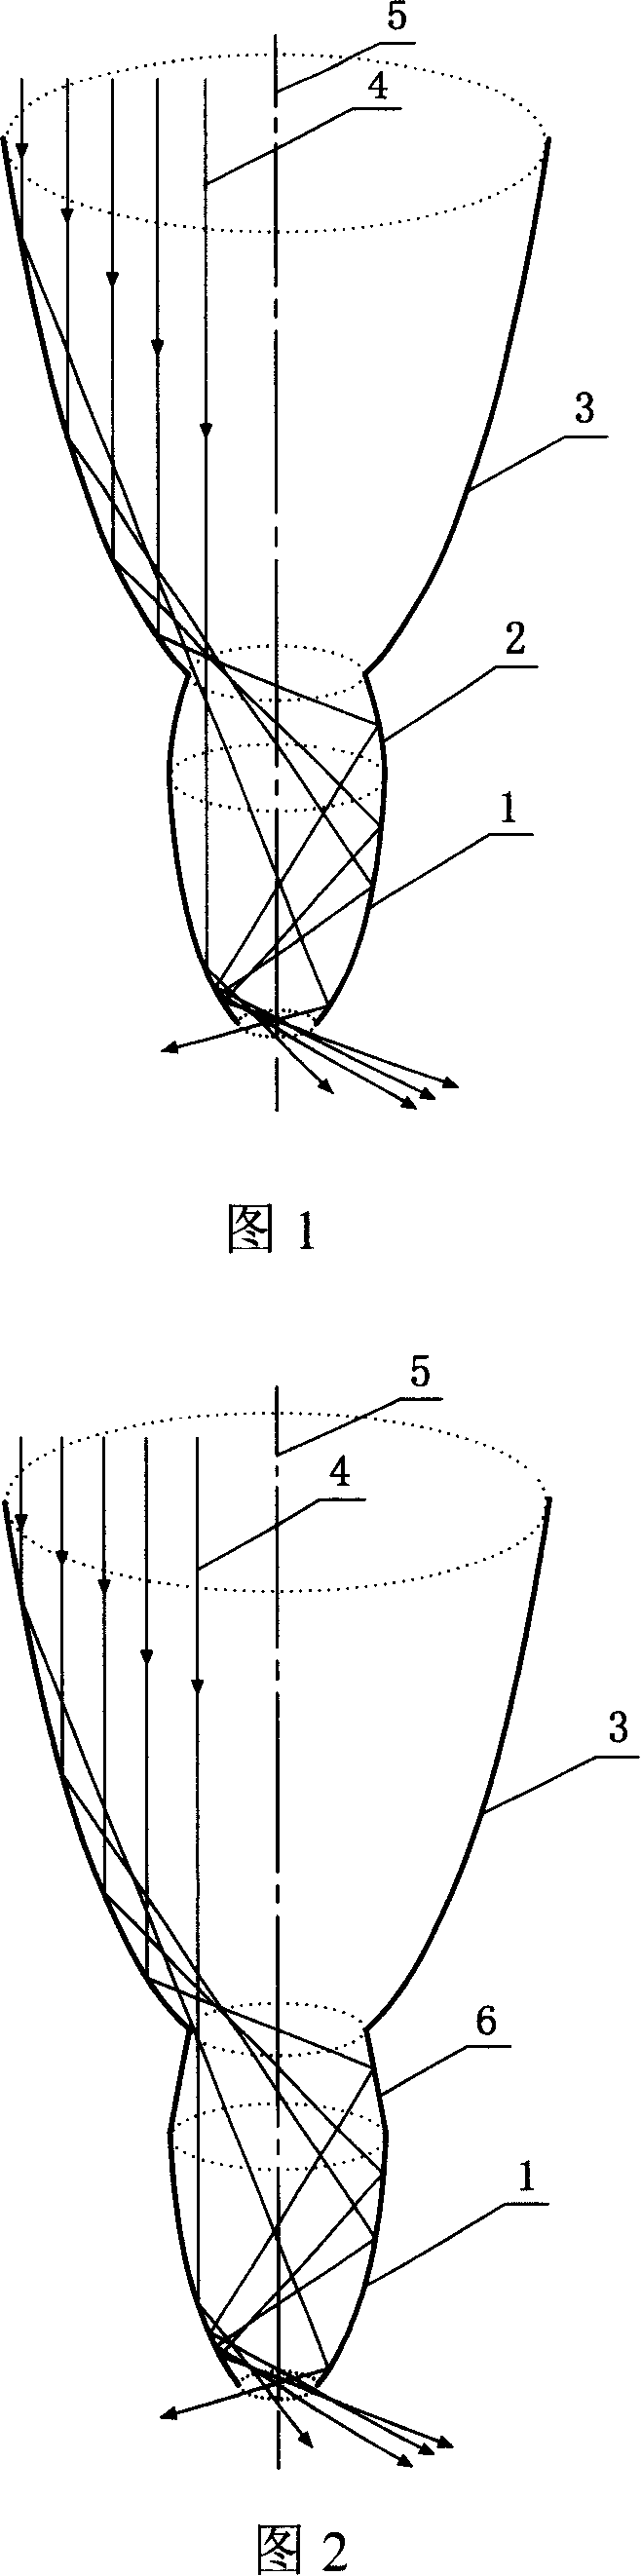 Multiple curved face composite solar energy concentrator based on bionics principle